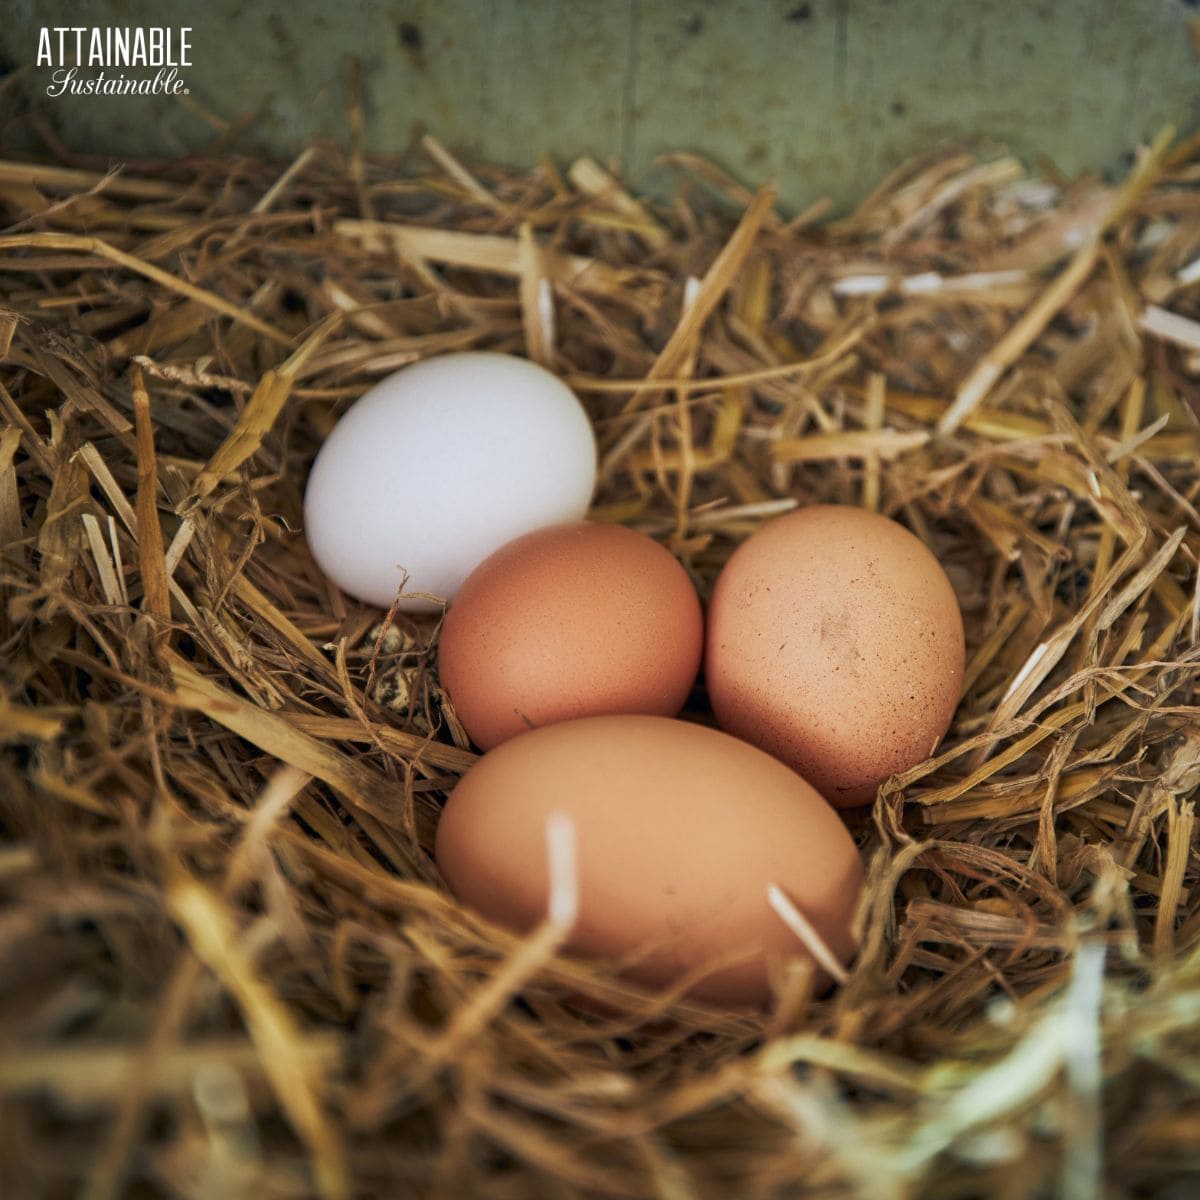 3 brown eggs and 1 white egg in a straw nest.